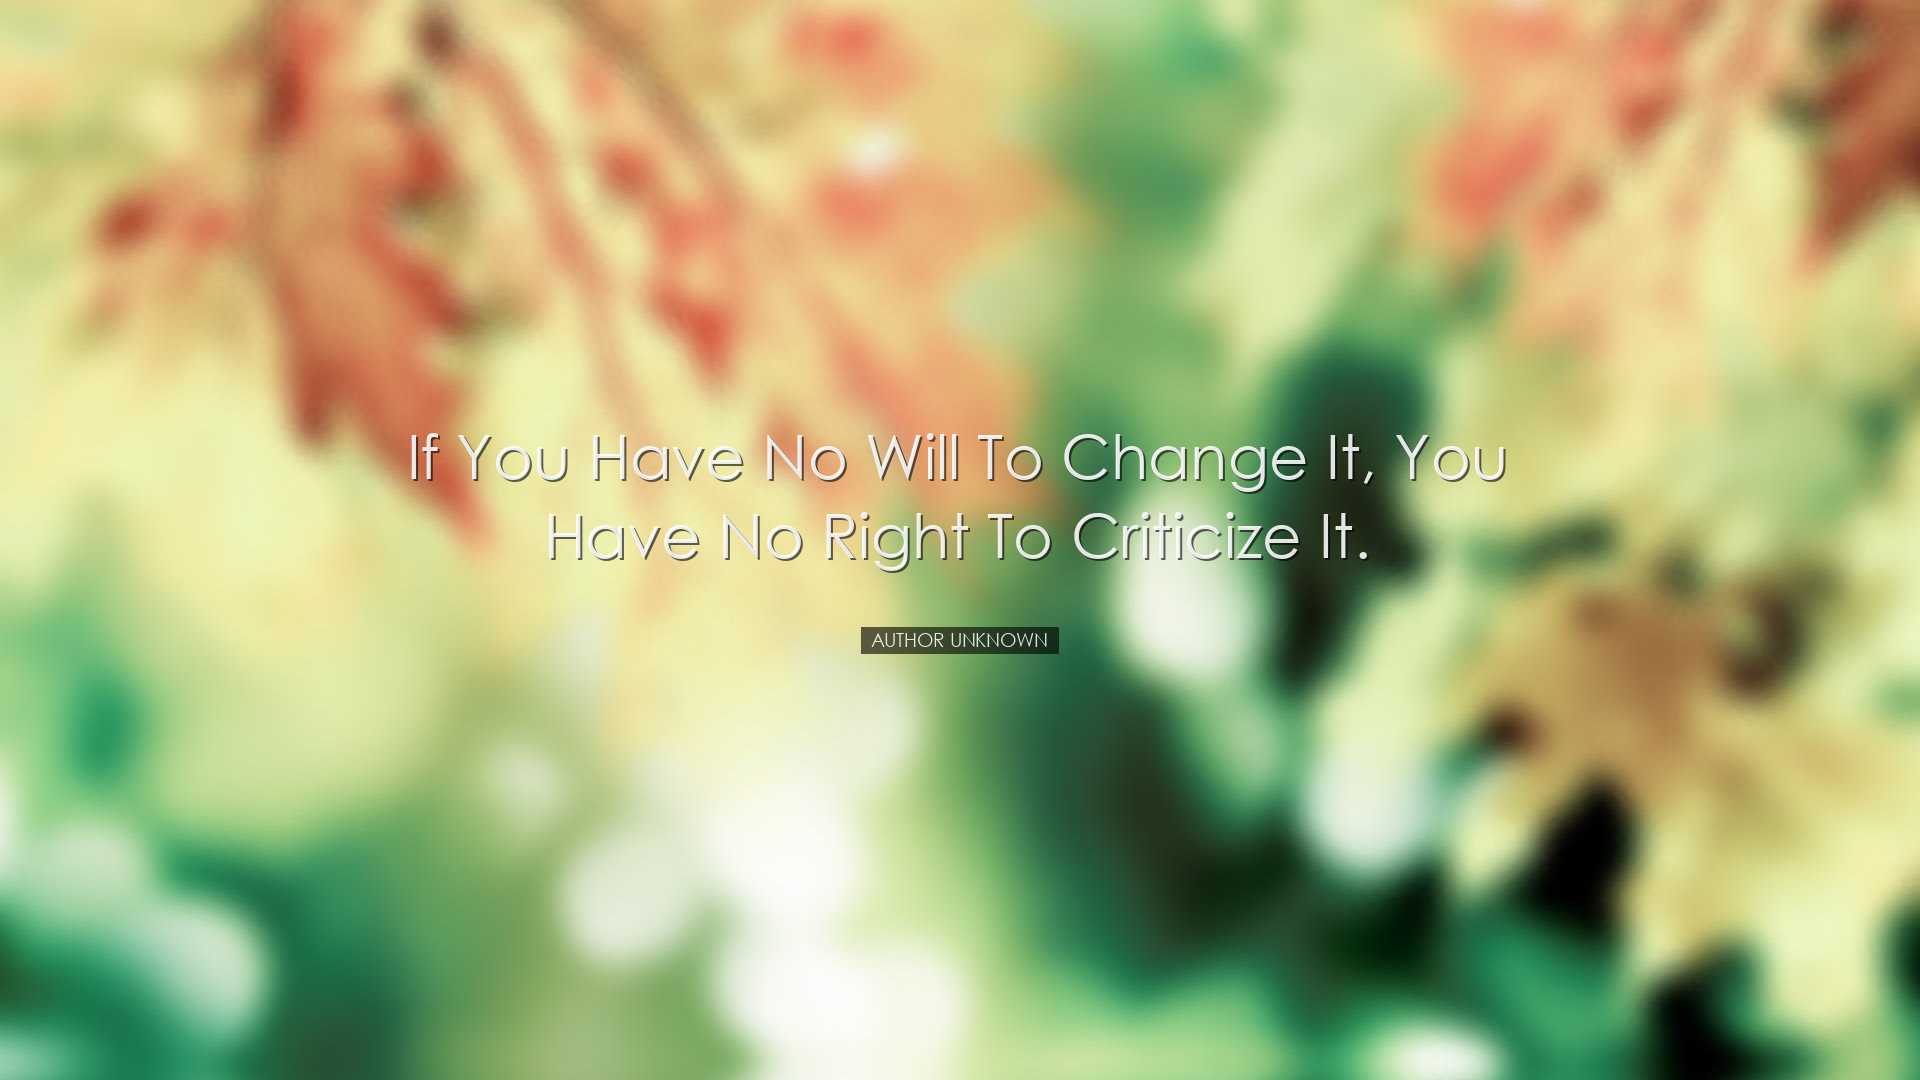 If you have no will to change it, you have no right to criticize i